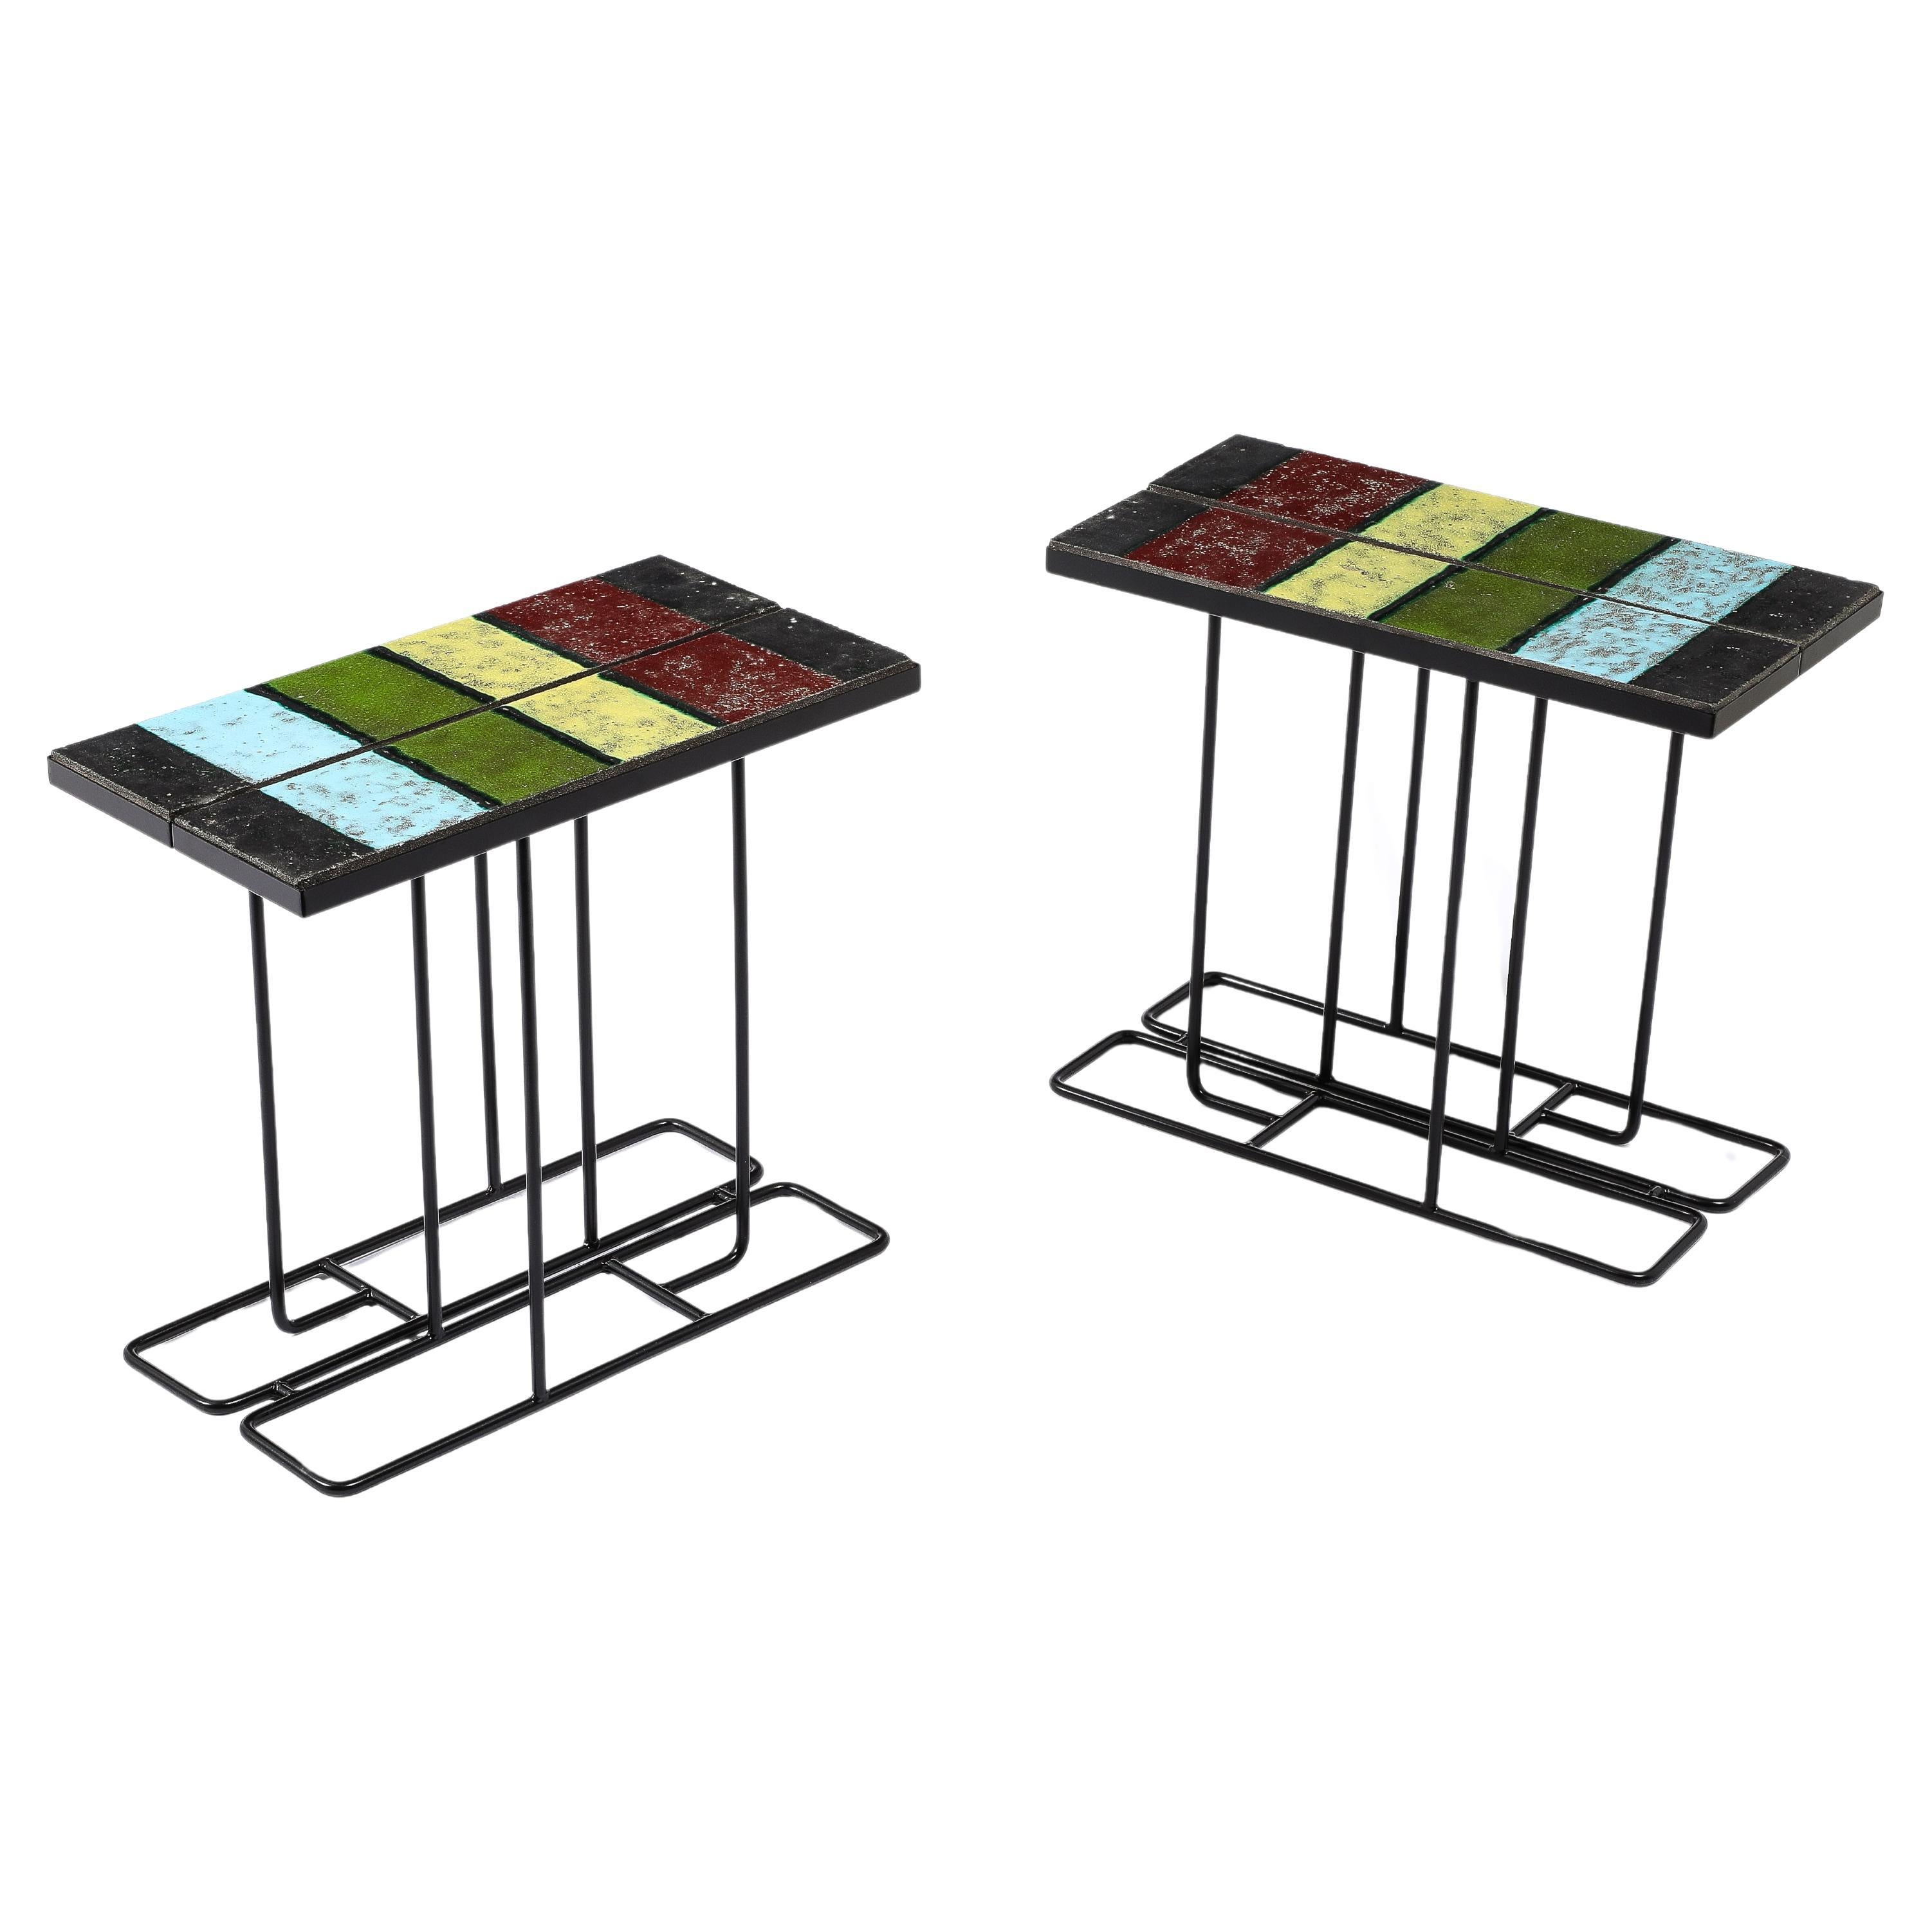 Pair of Enameled Lava Tile Tables, France 1950's For Sale